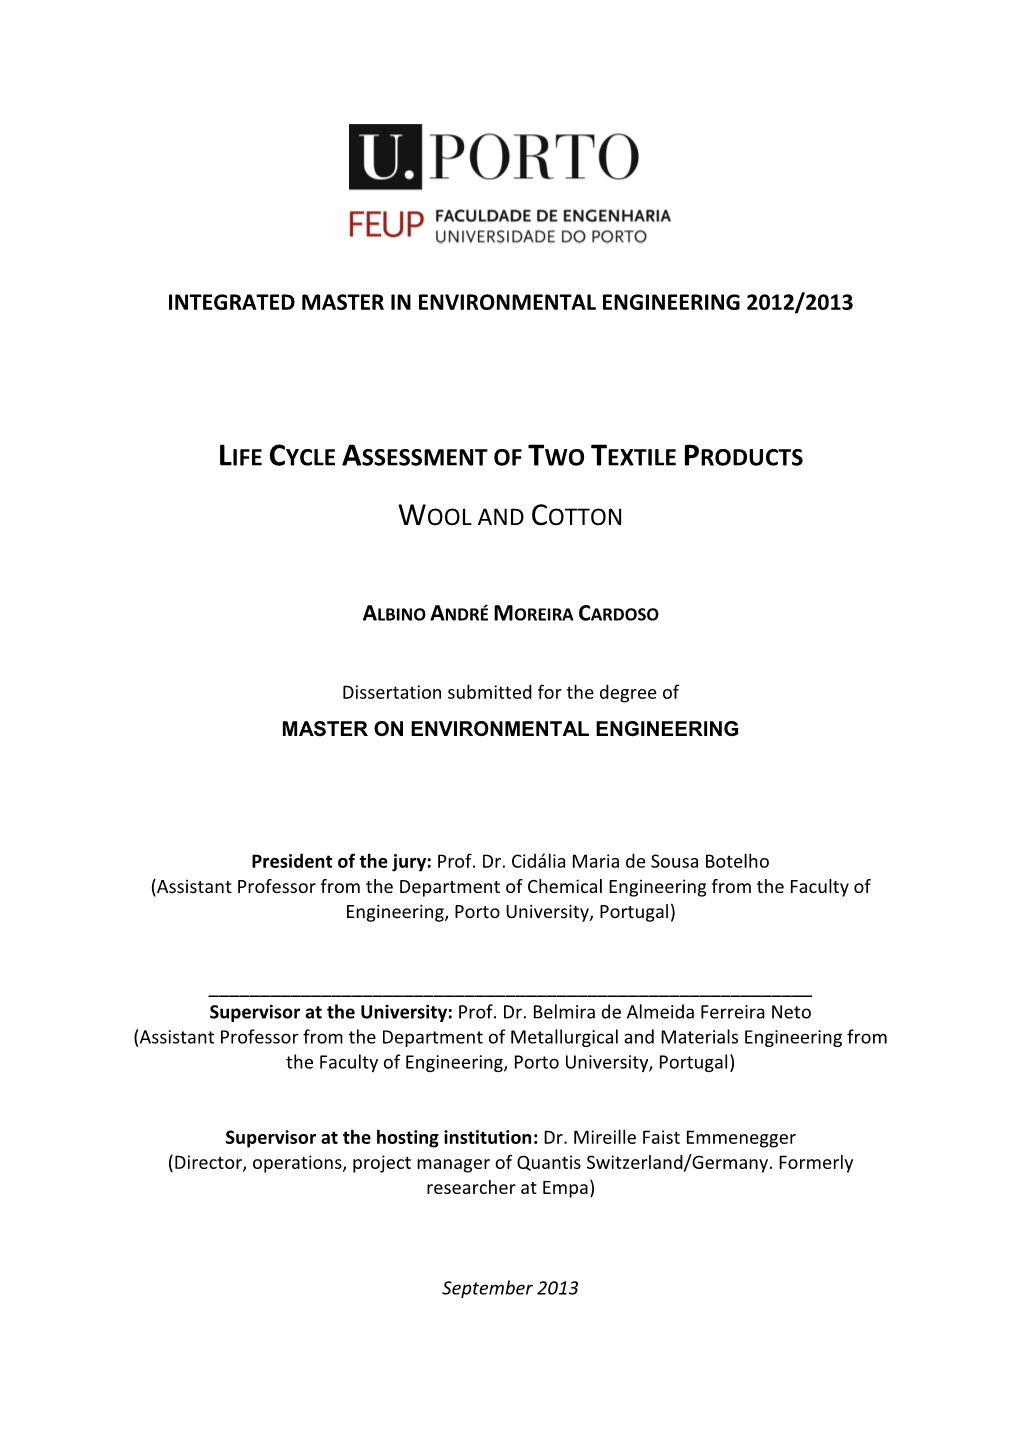 Life Cycle Assessment of Two Textile Products Wool And